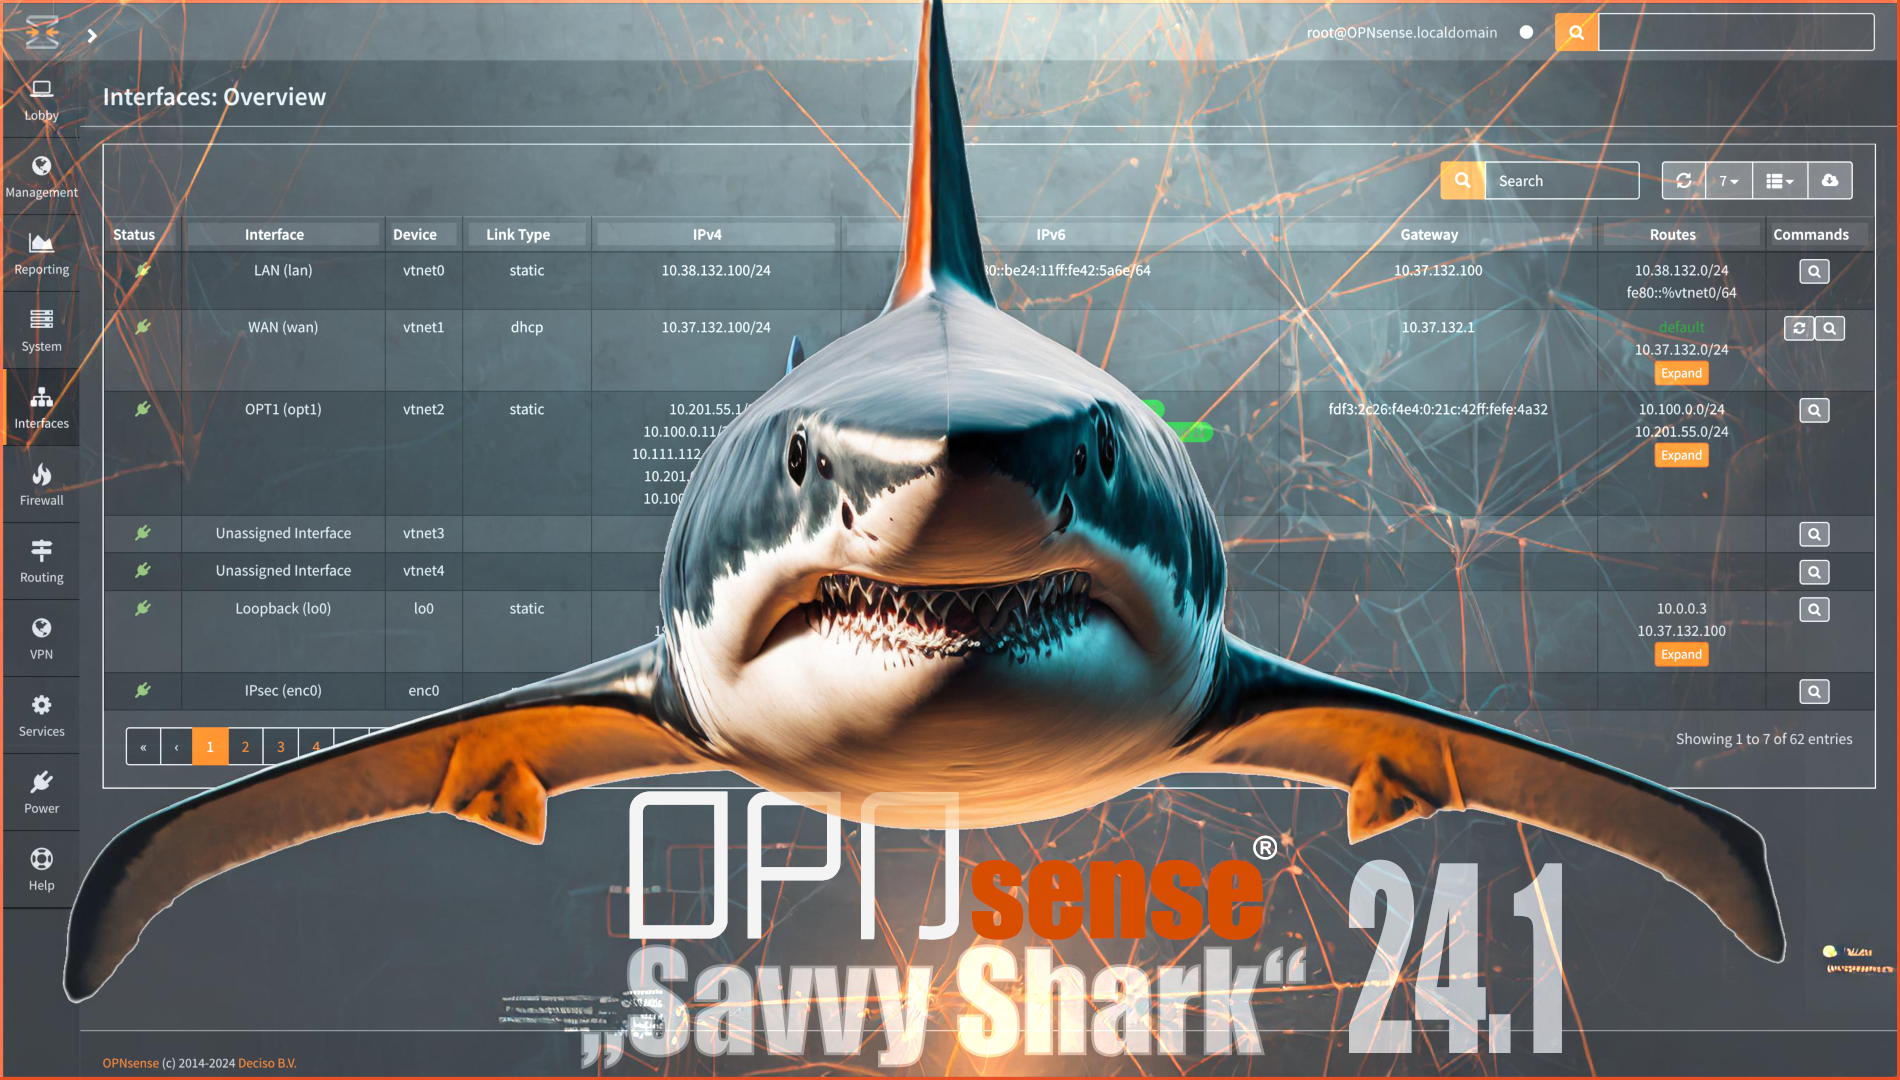 Deciso® Unveils ‘Savvy Shark’: <br>Dive into the advanced security of OPNsense® 24.1